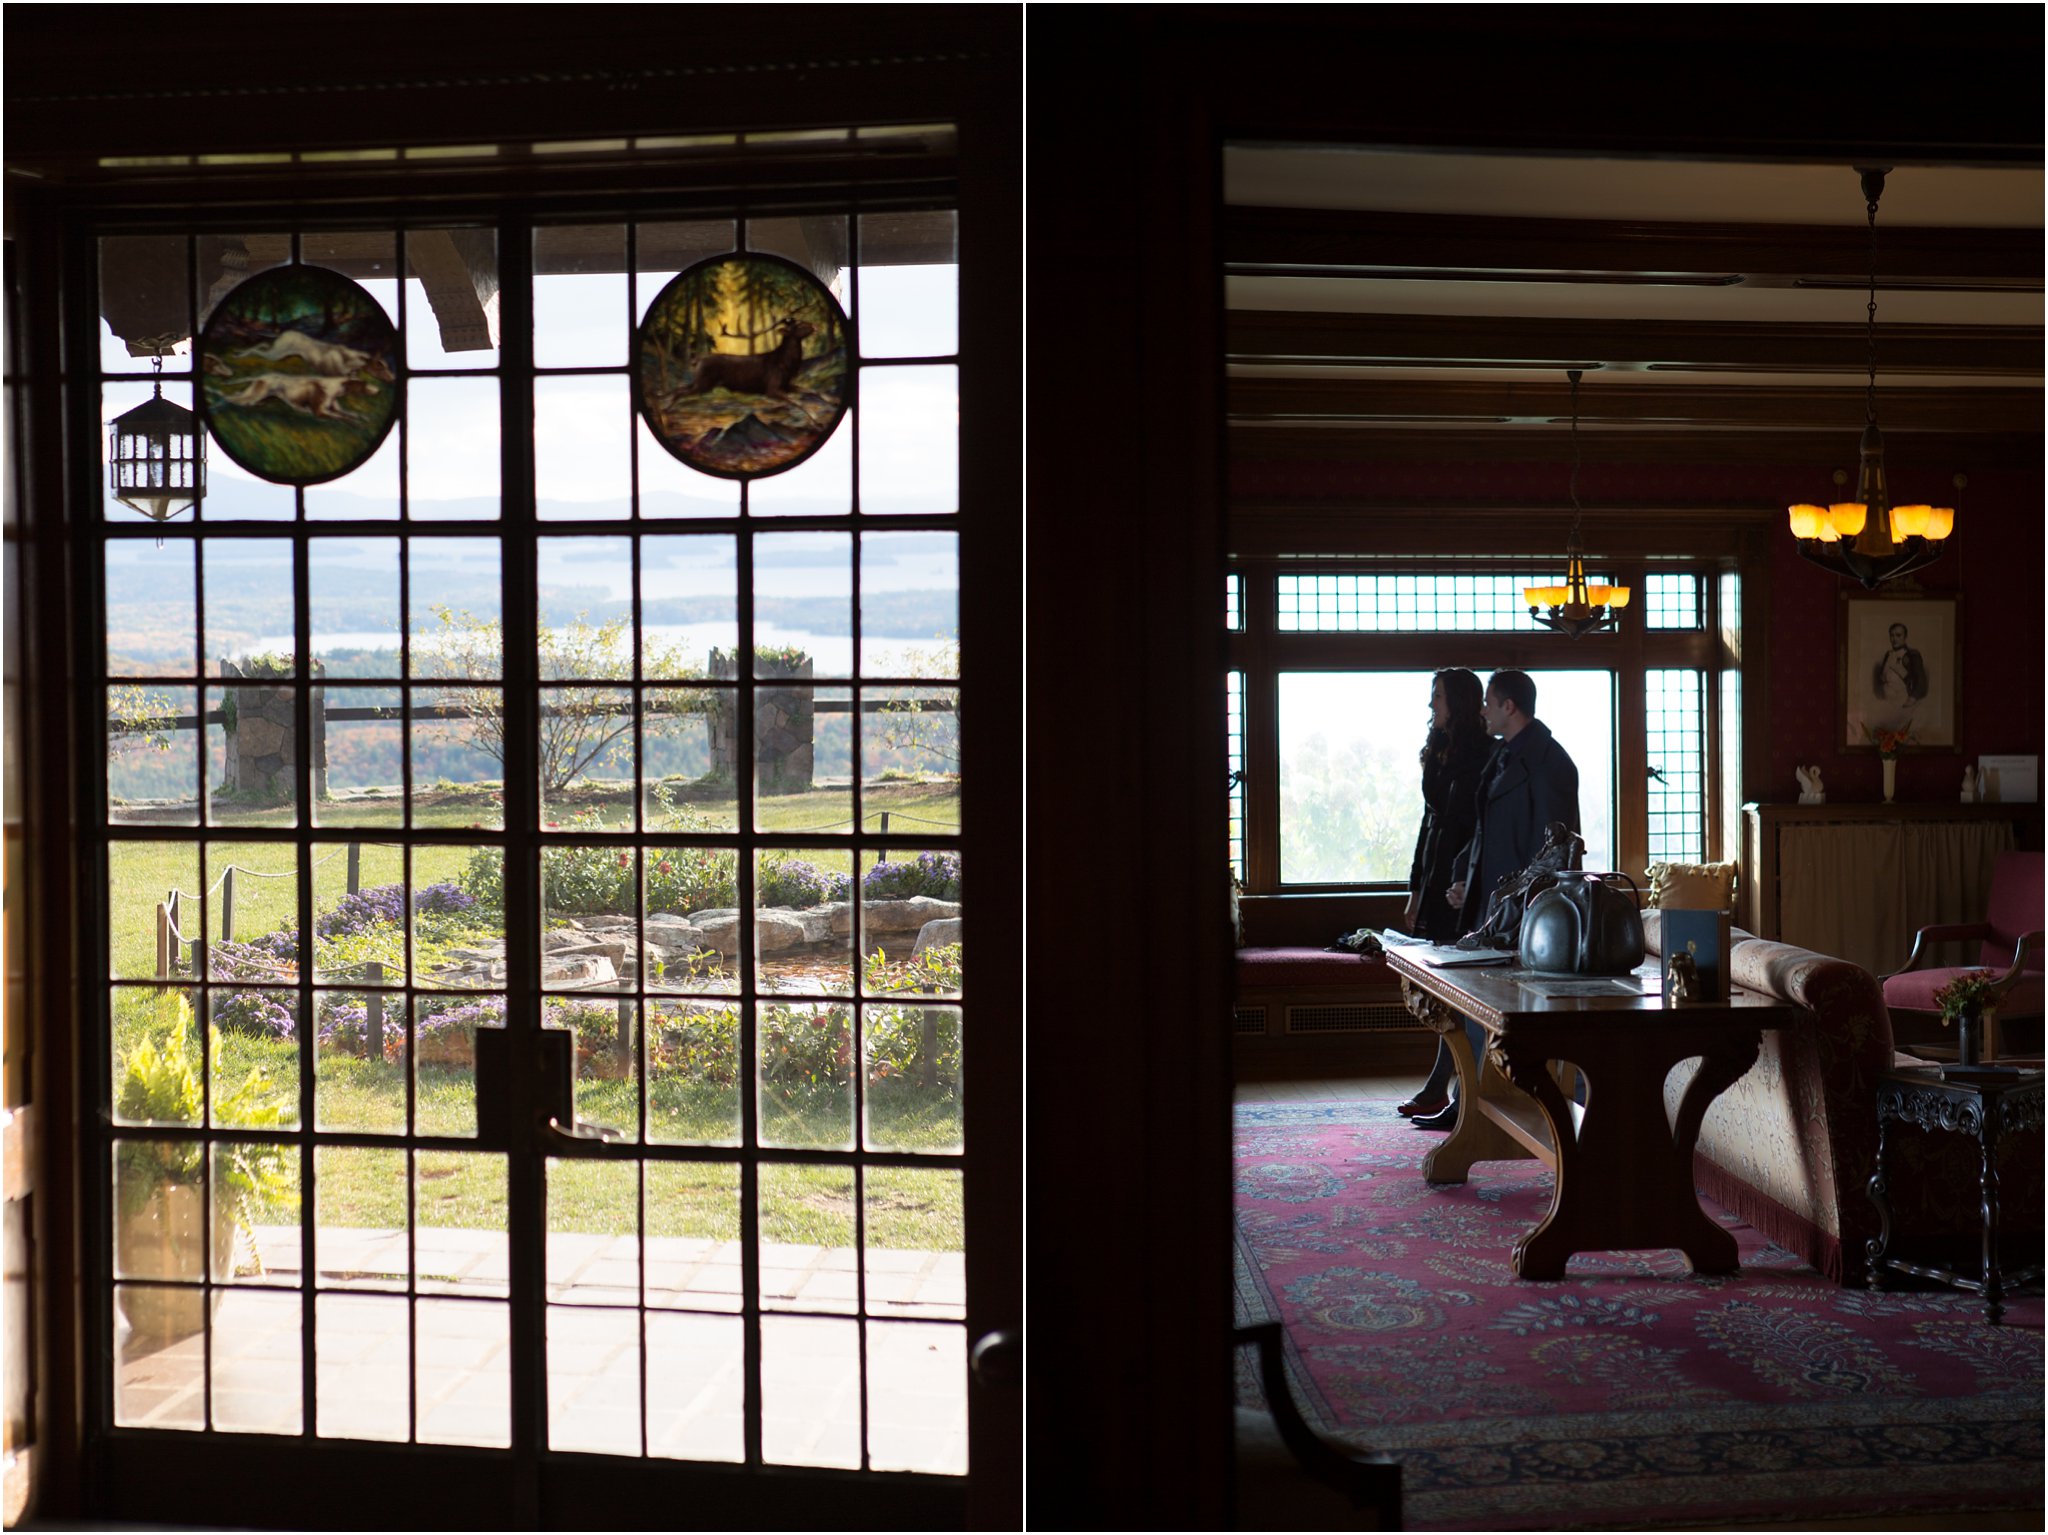 Garden doors and interior at Castle in the Clouds